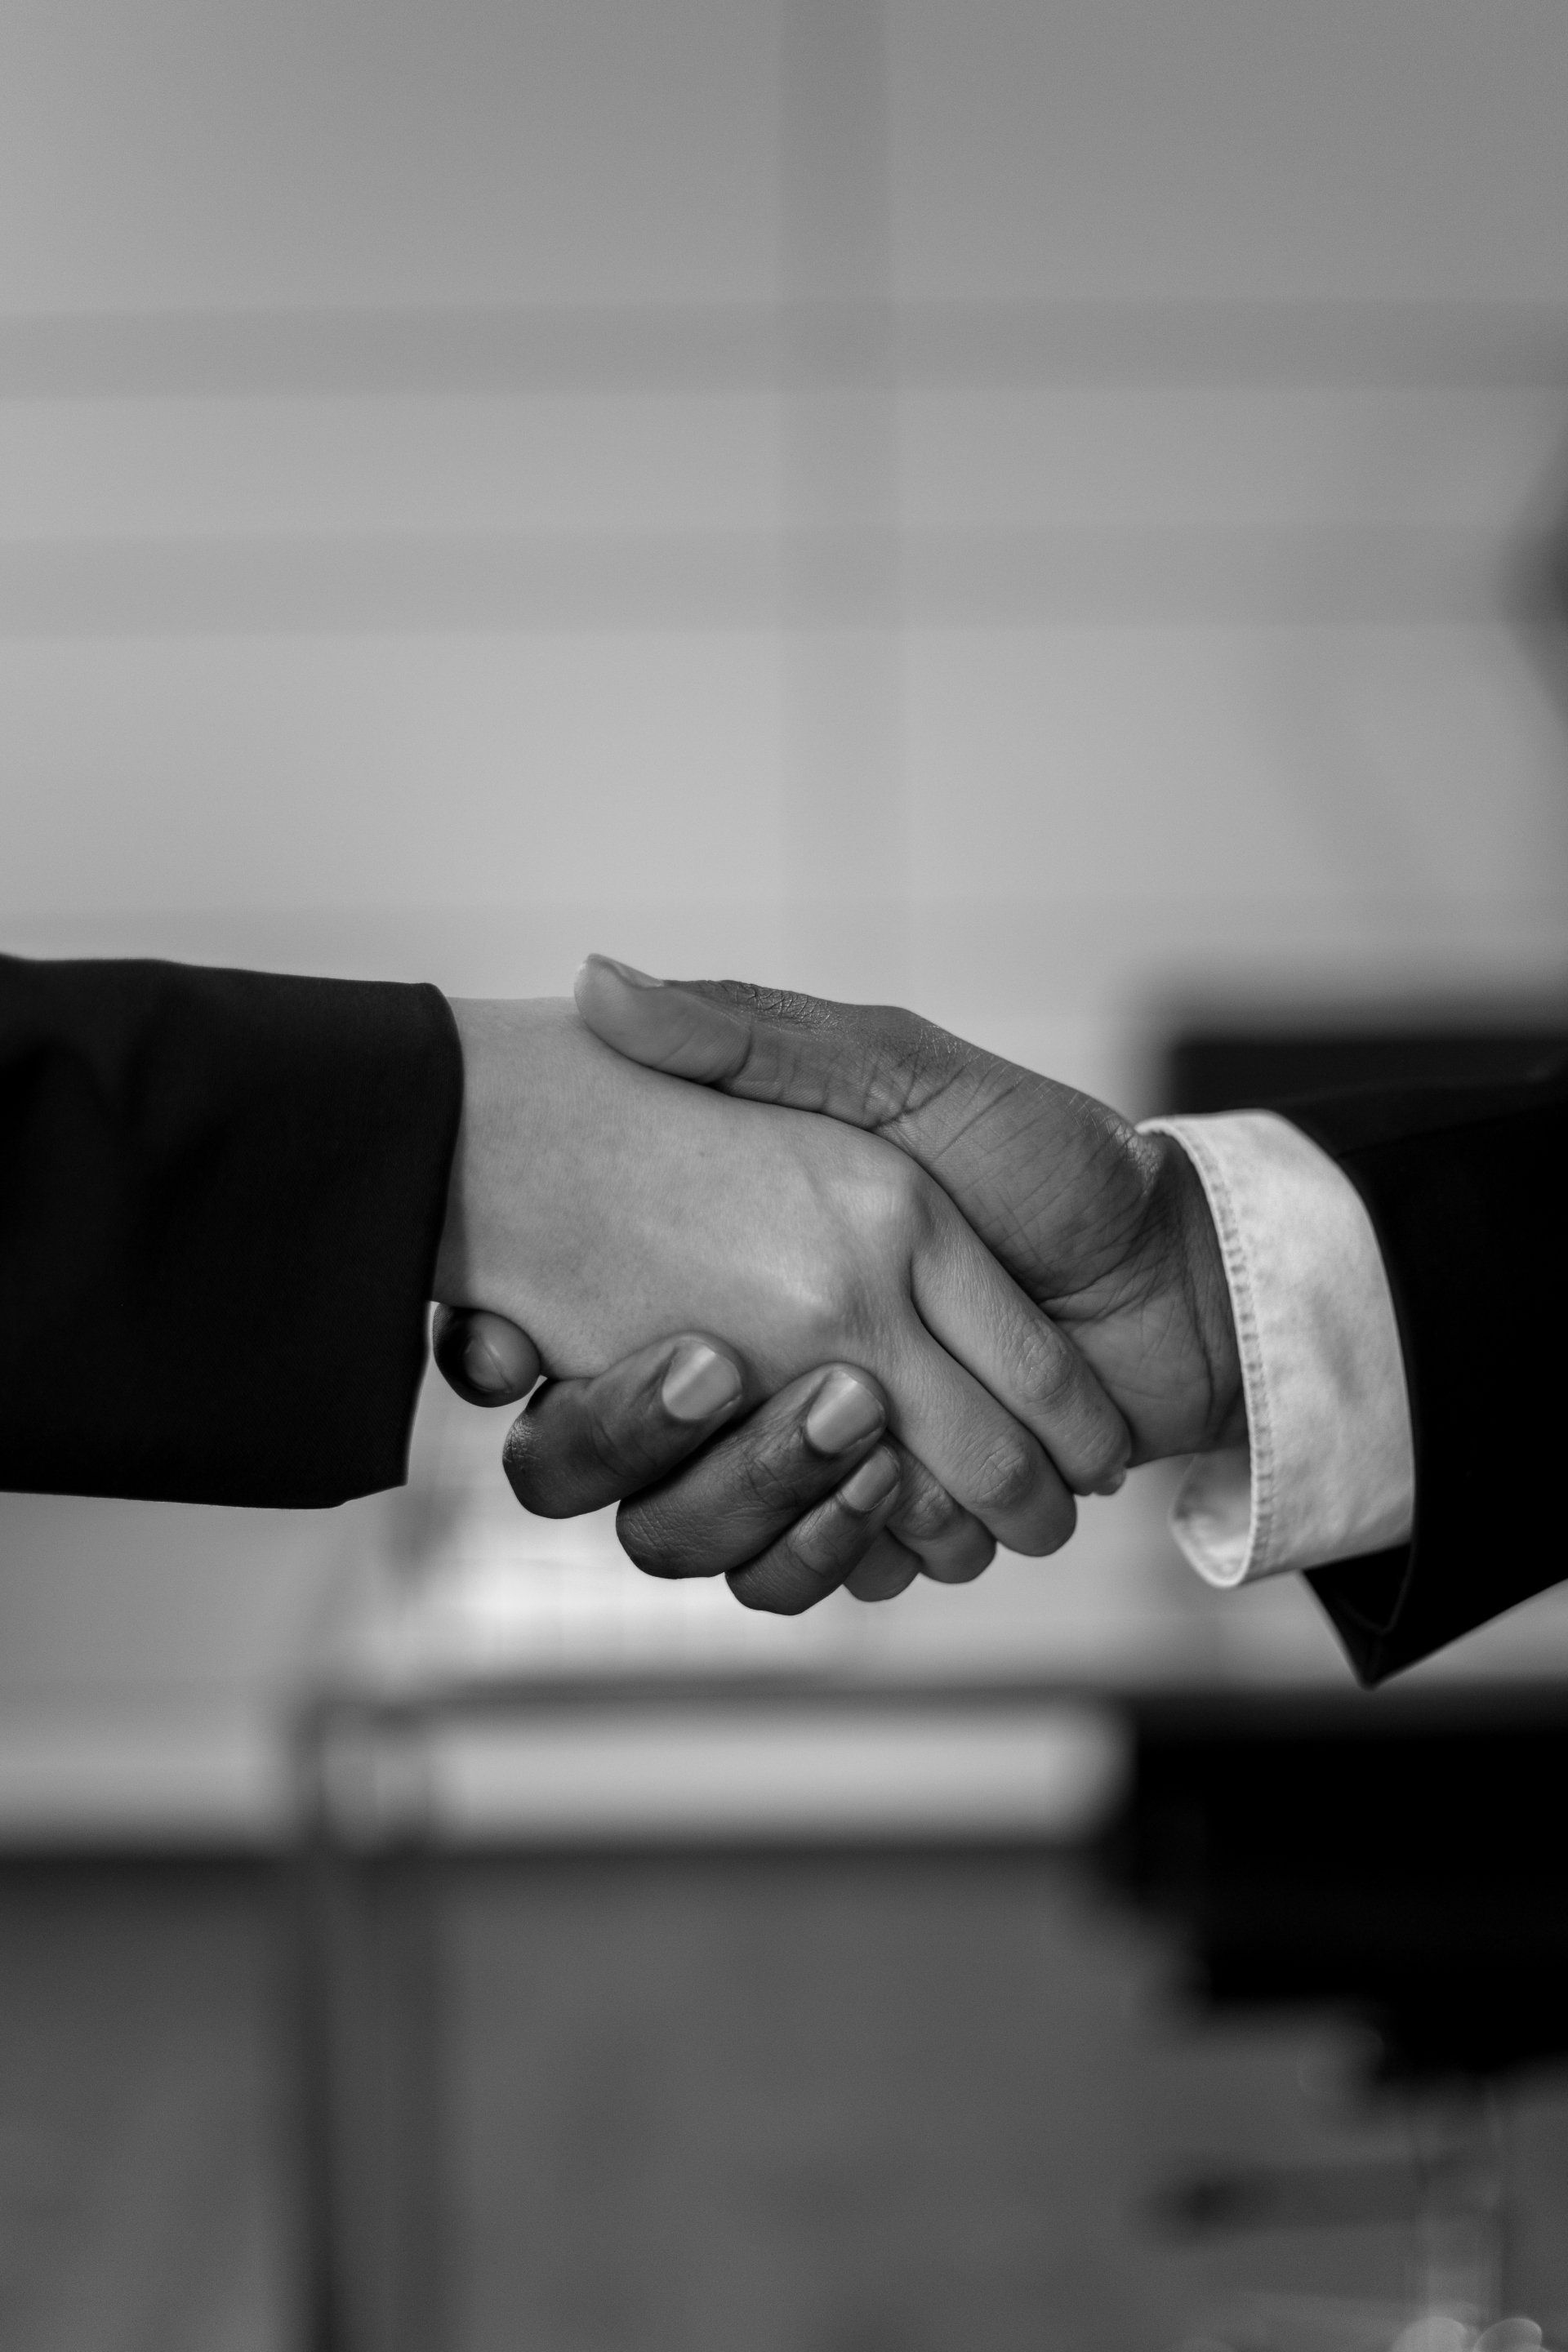 Two people are shaking hands in a black and white photo.